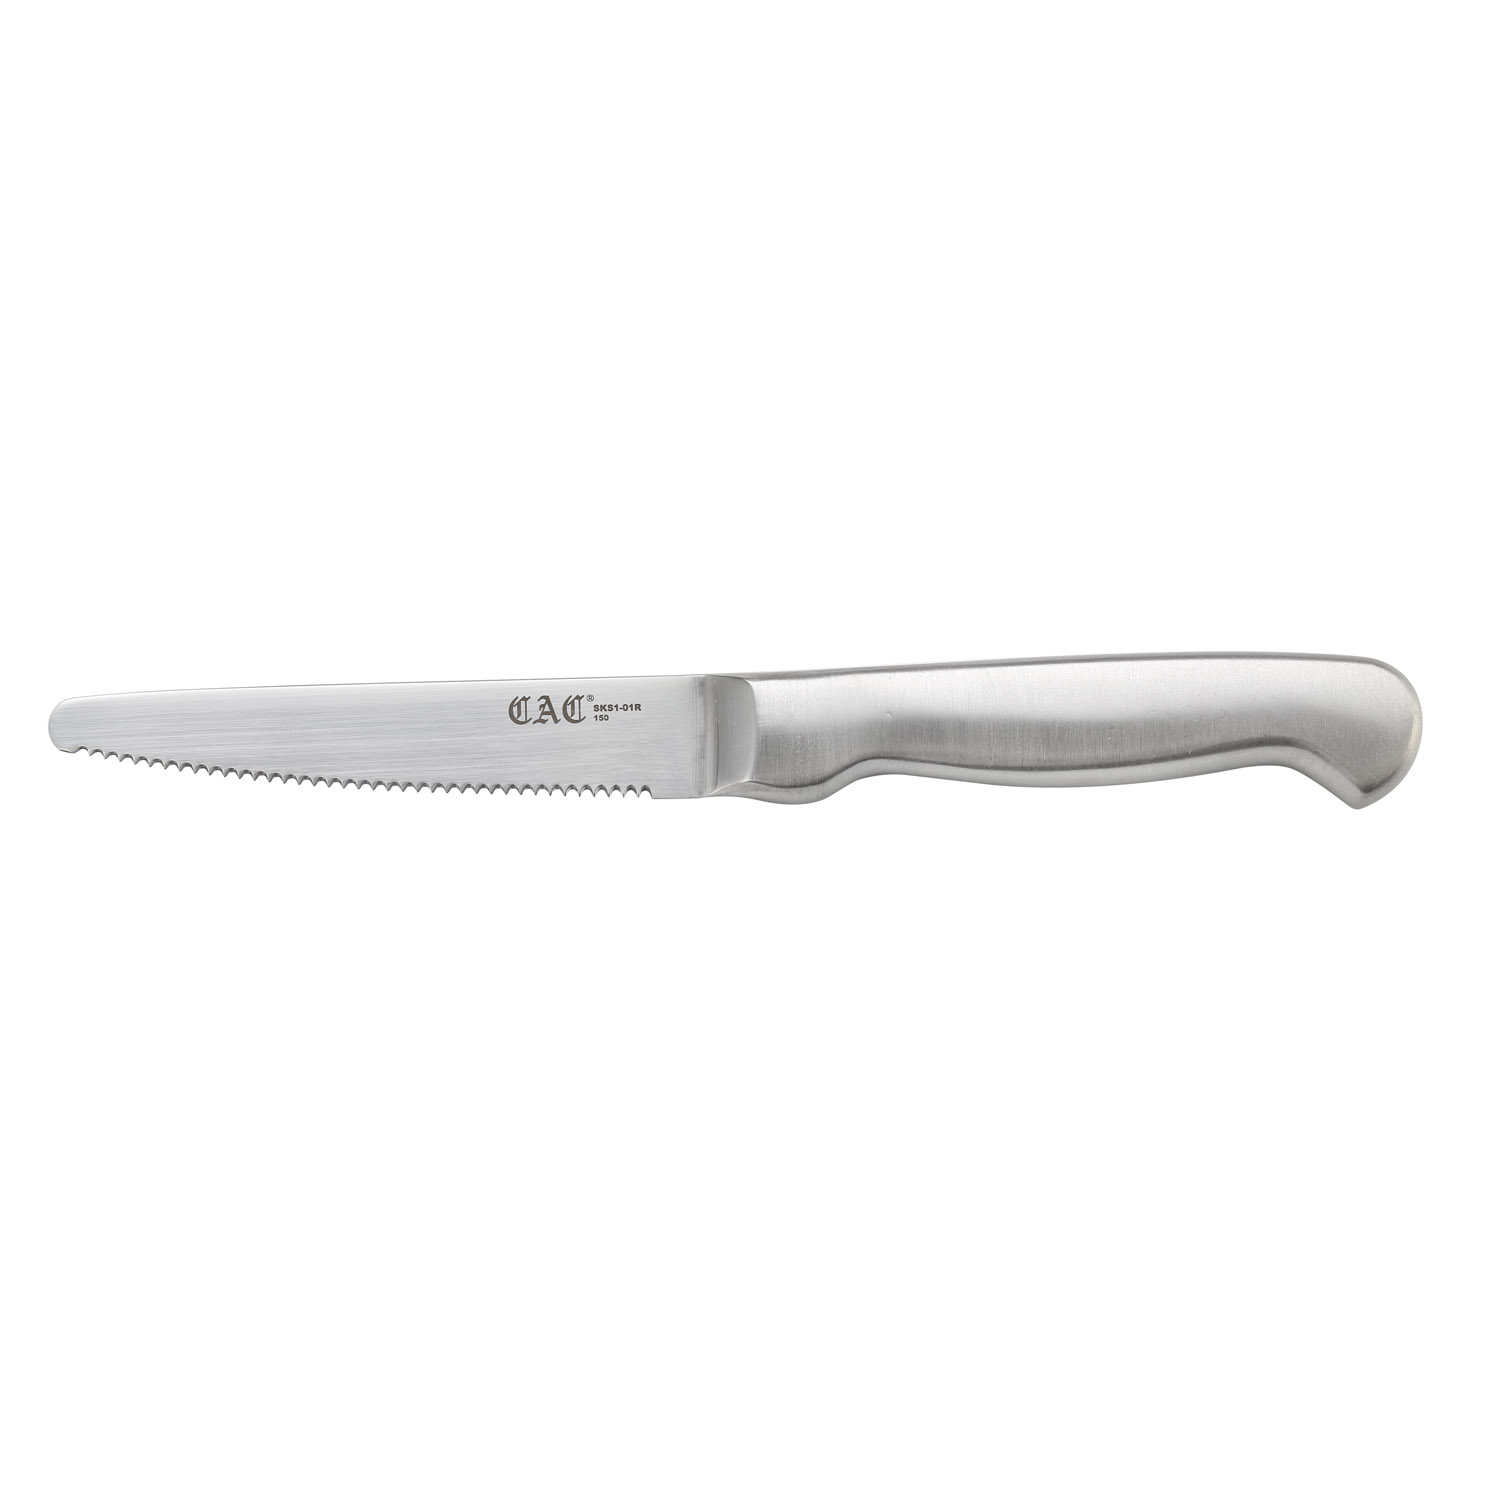 CAC China SKS1-01R Round Tip Steak Knife with Handle Hollow 4 1/2" - 1 dozen